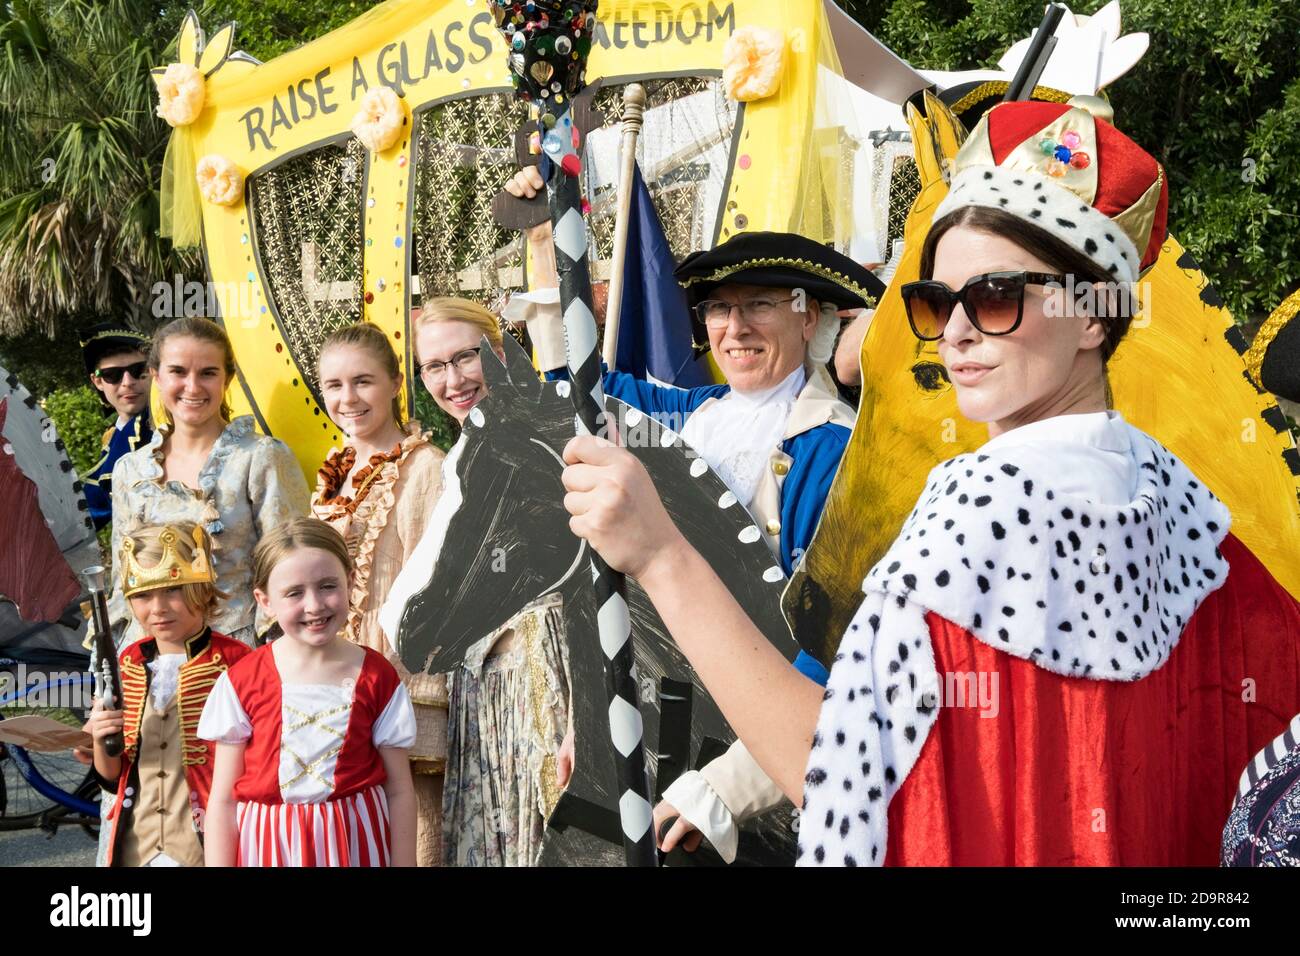 Residents in colonial costumes celebrate the play Hamilton during the annual Independence Day parade July 4, 2019 in Sullivan's Island, South Carolina. The tiny affluent Sea Island beach community across from Charleston holds an outsized golf cart parade featuring more than 75 decorated carts. Stock Photo